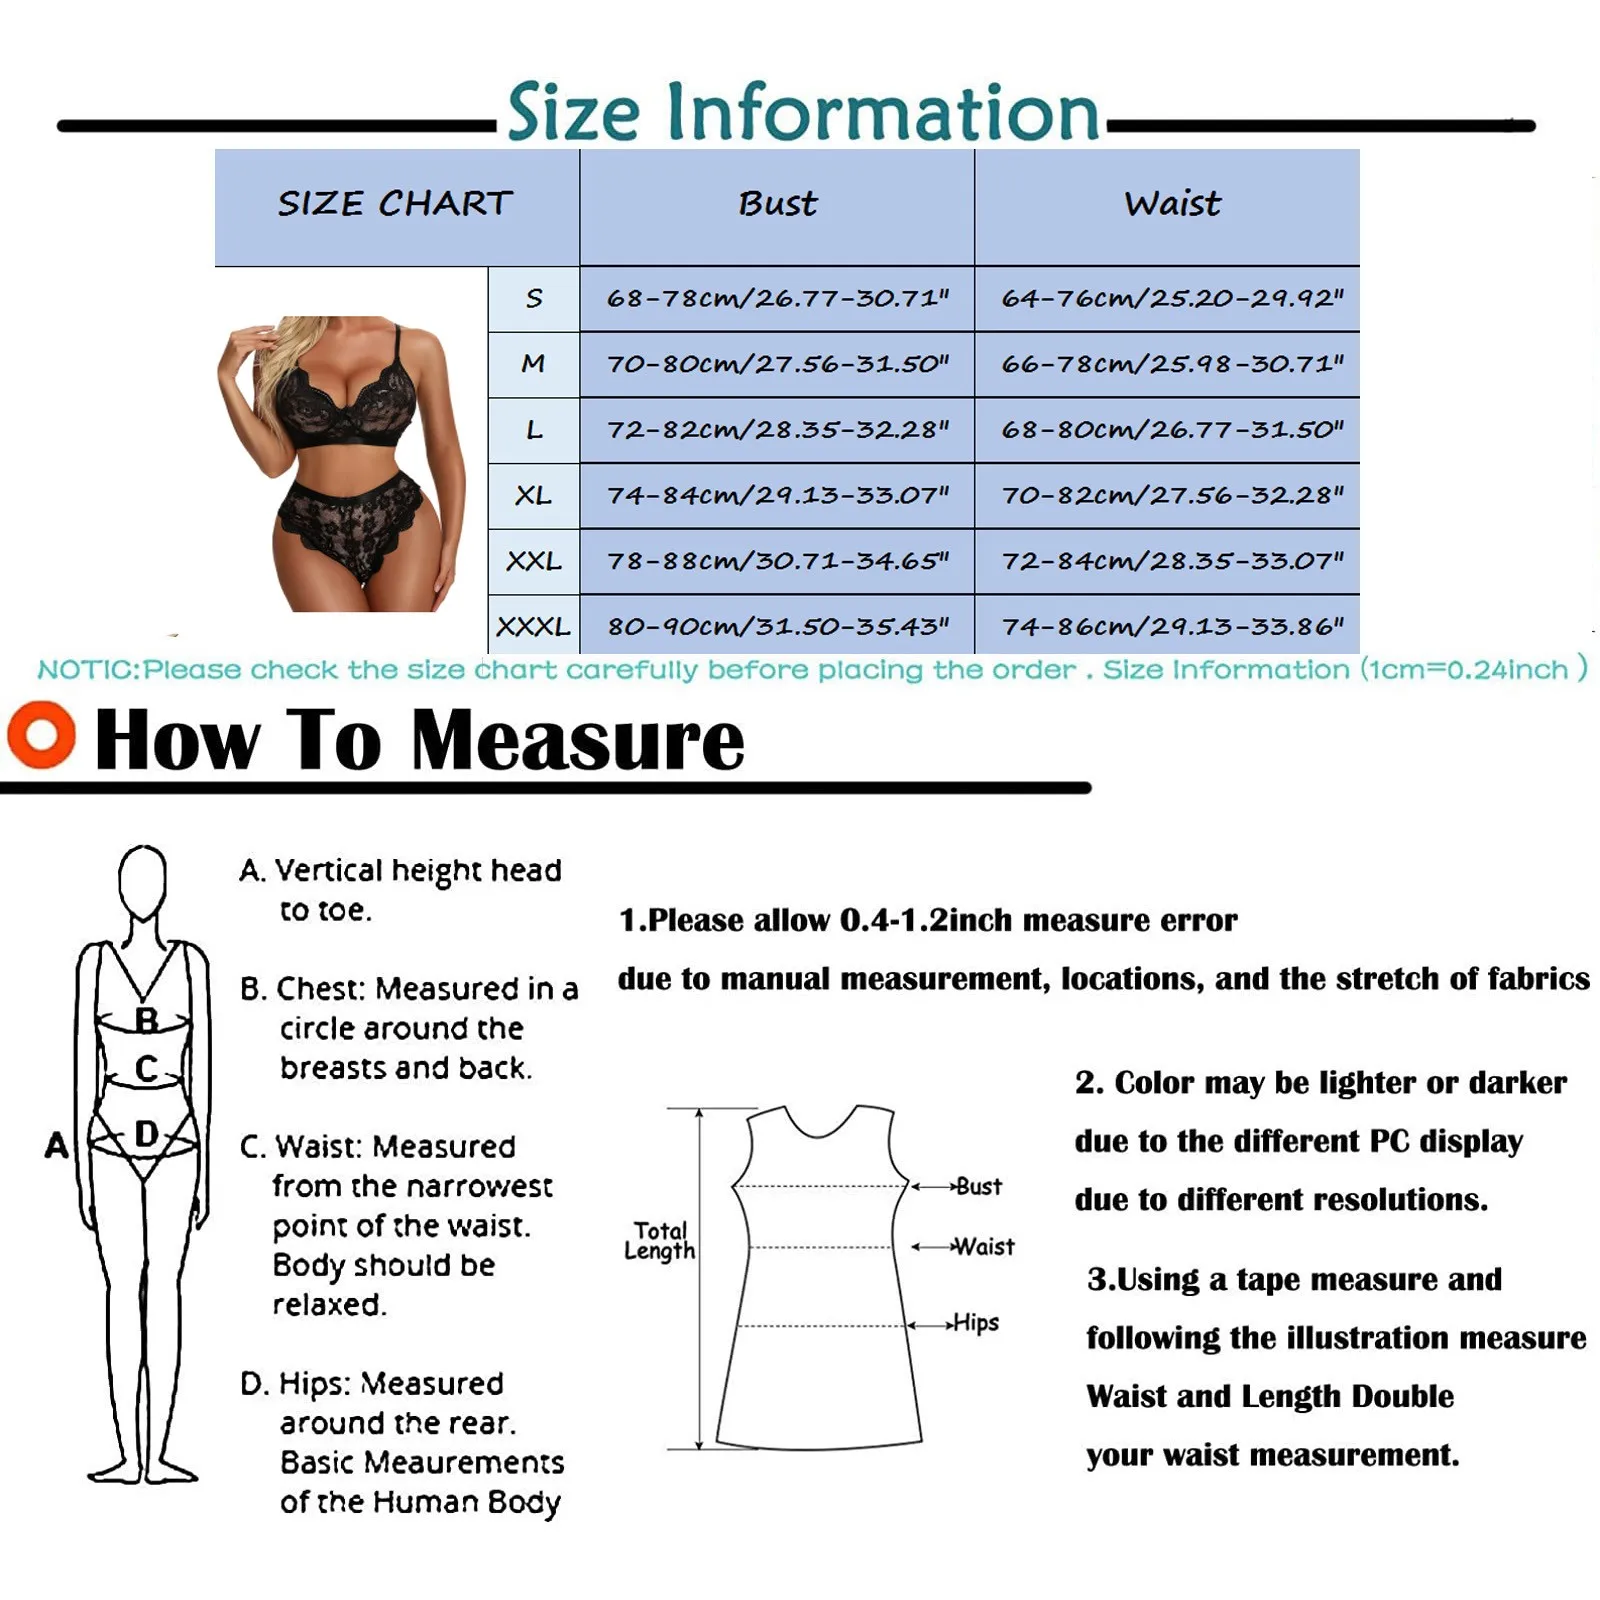 french knickers set Women's Plus Size Sexy Lingerie Pornos Suit Lace Transparent Gathered Thin Wireless Bra Lingerie Underwear Pajamas Exotic Set bra and underwear set